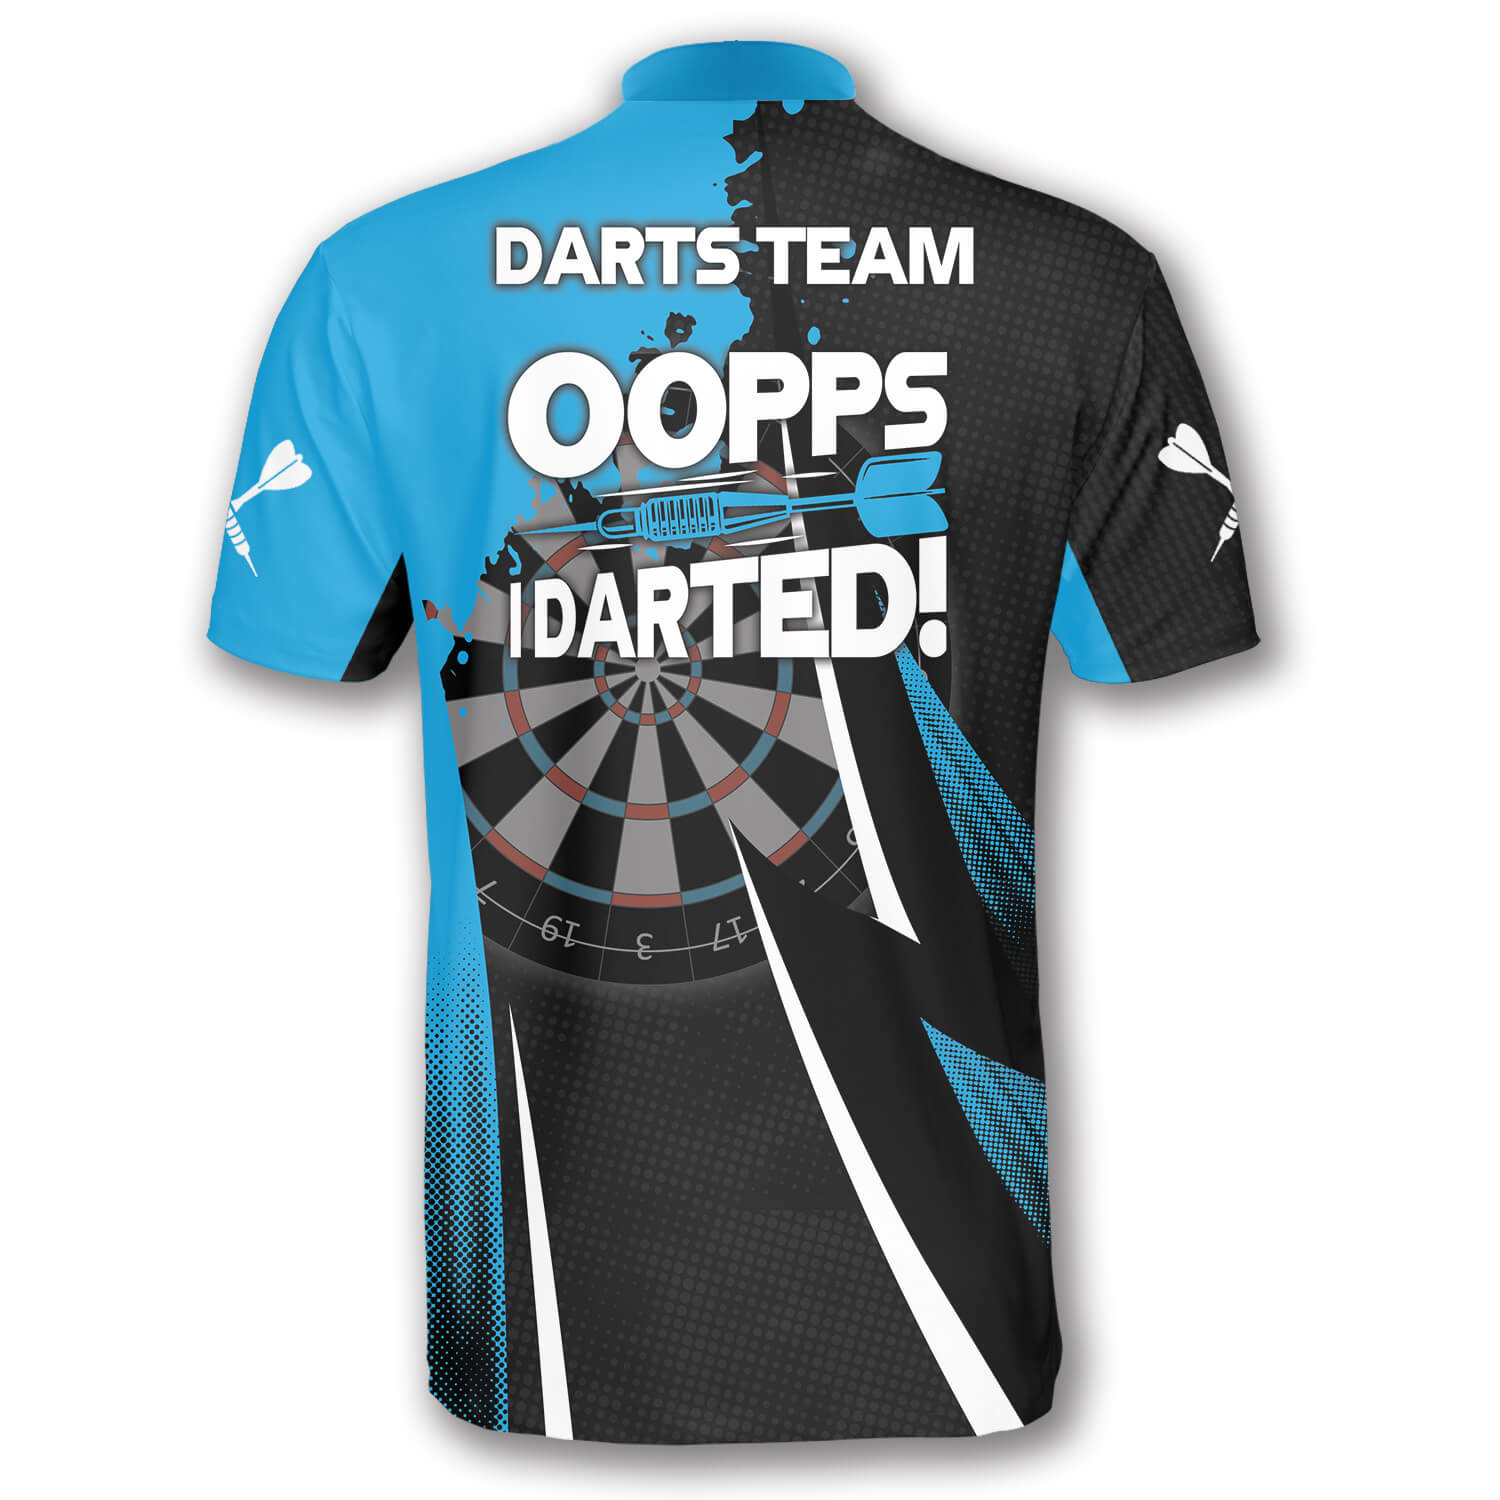 Oopps I Darted Custom Darts Jerseys for Men/ Personalized Name Dart Jersey 3D Shirt